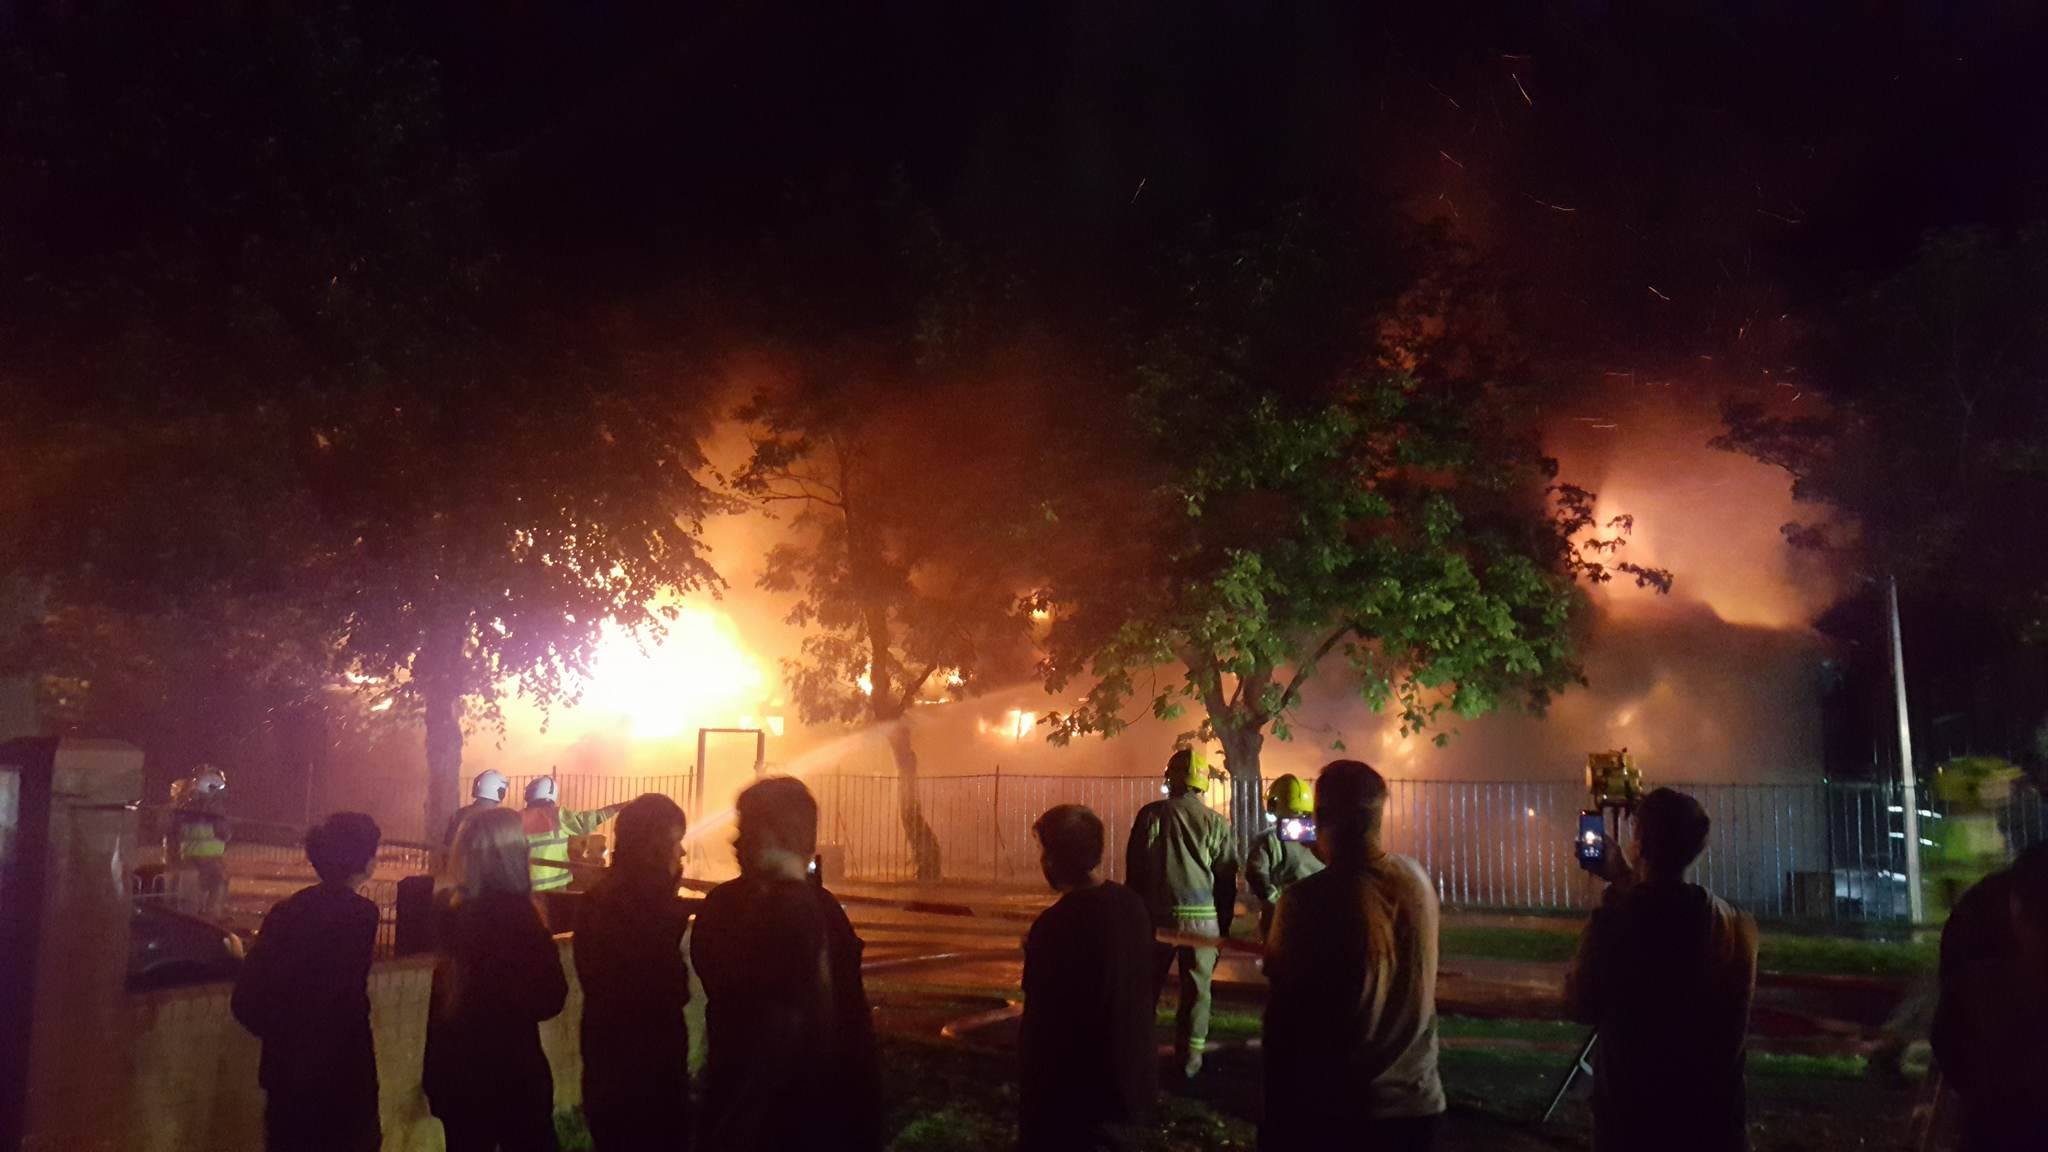 By 11.30pm the building had collapsed and surrounding trees had begun to catch alight. Photo: Zoe Clarke